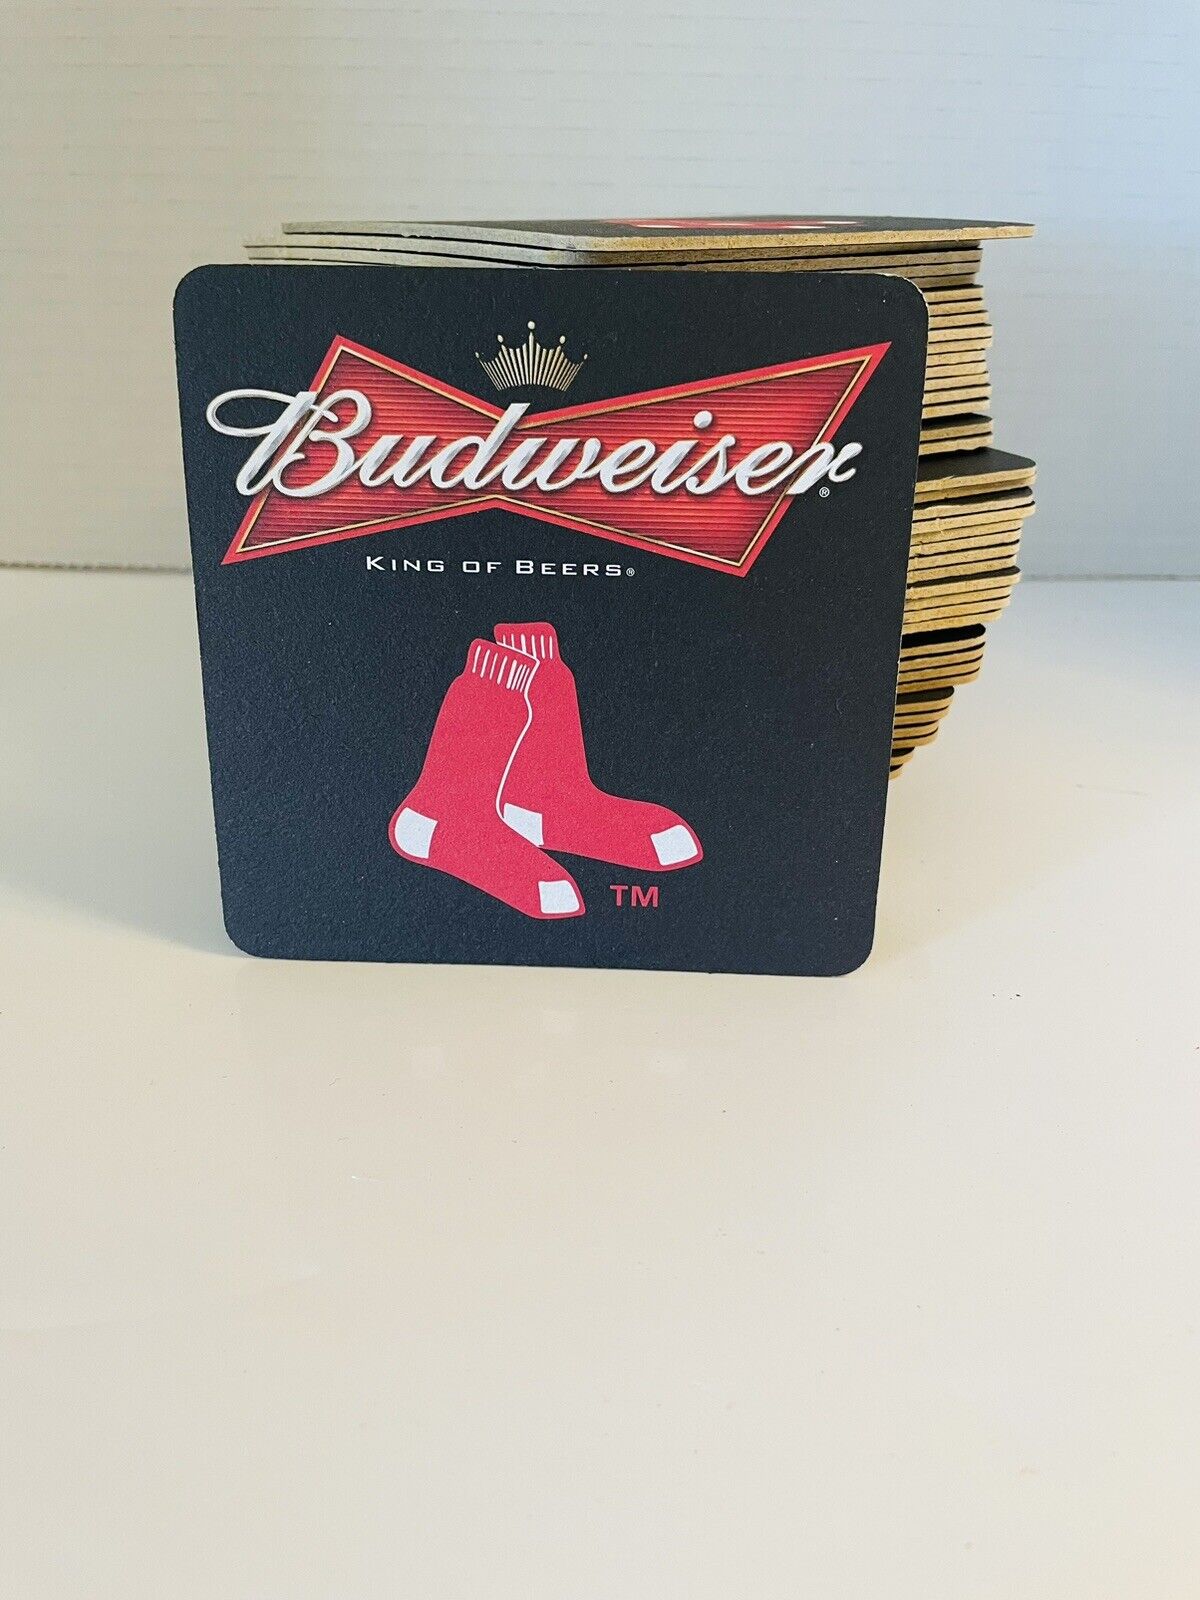 Lot Of 49 Budweiser Red Sox Baseball Beer Coasters 4” Square